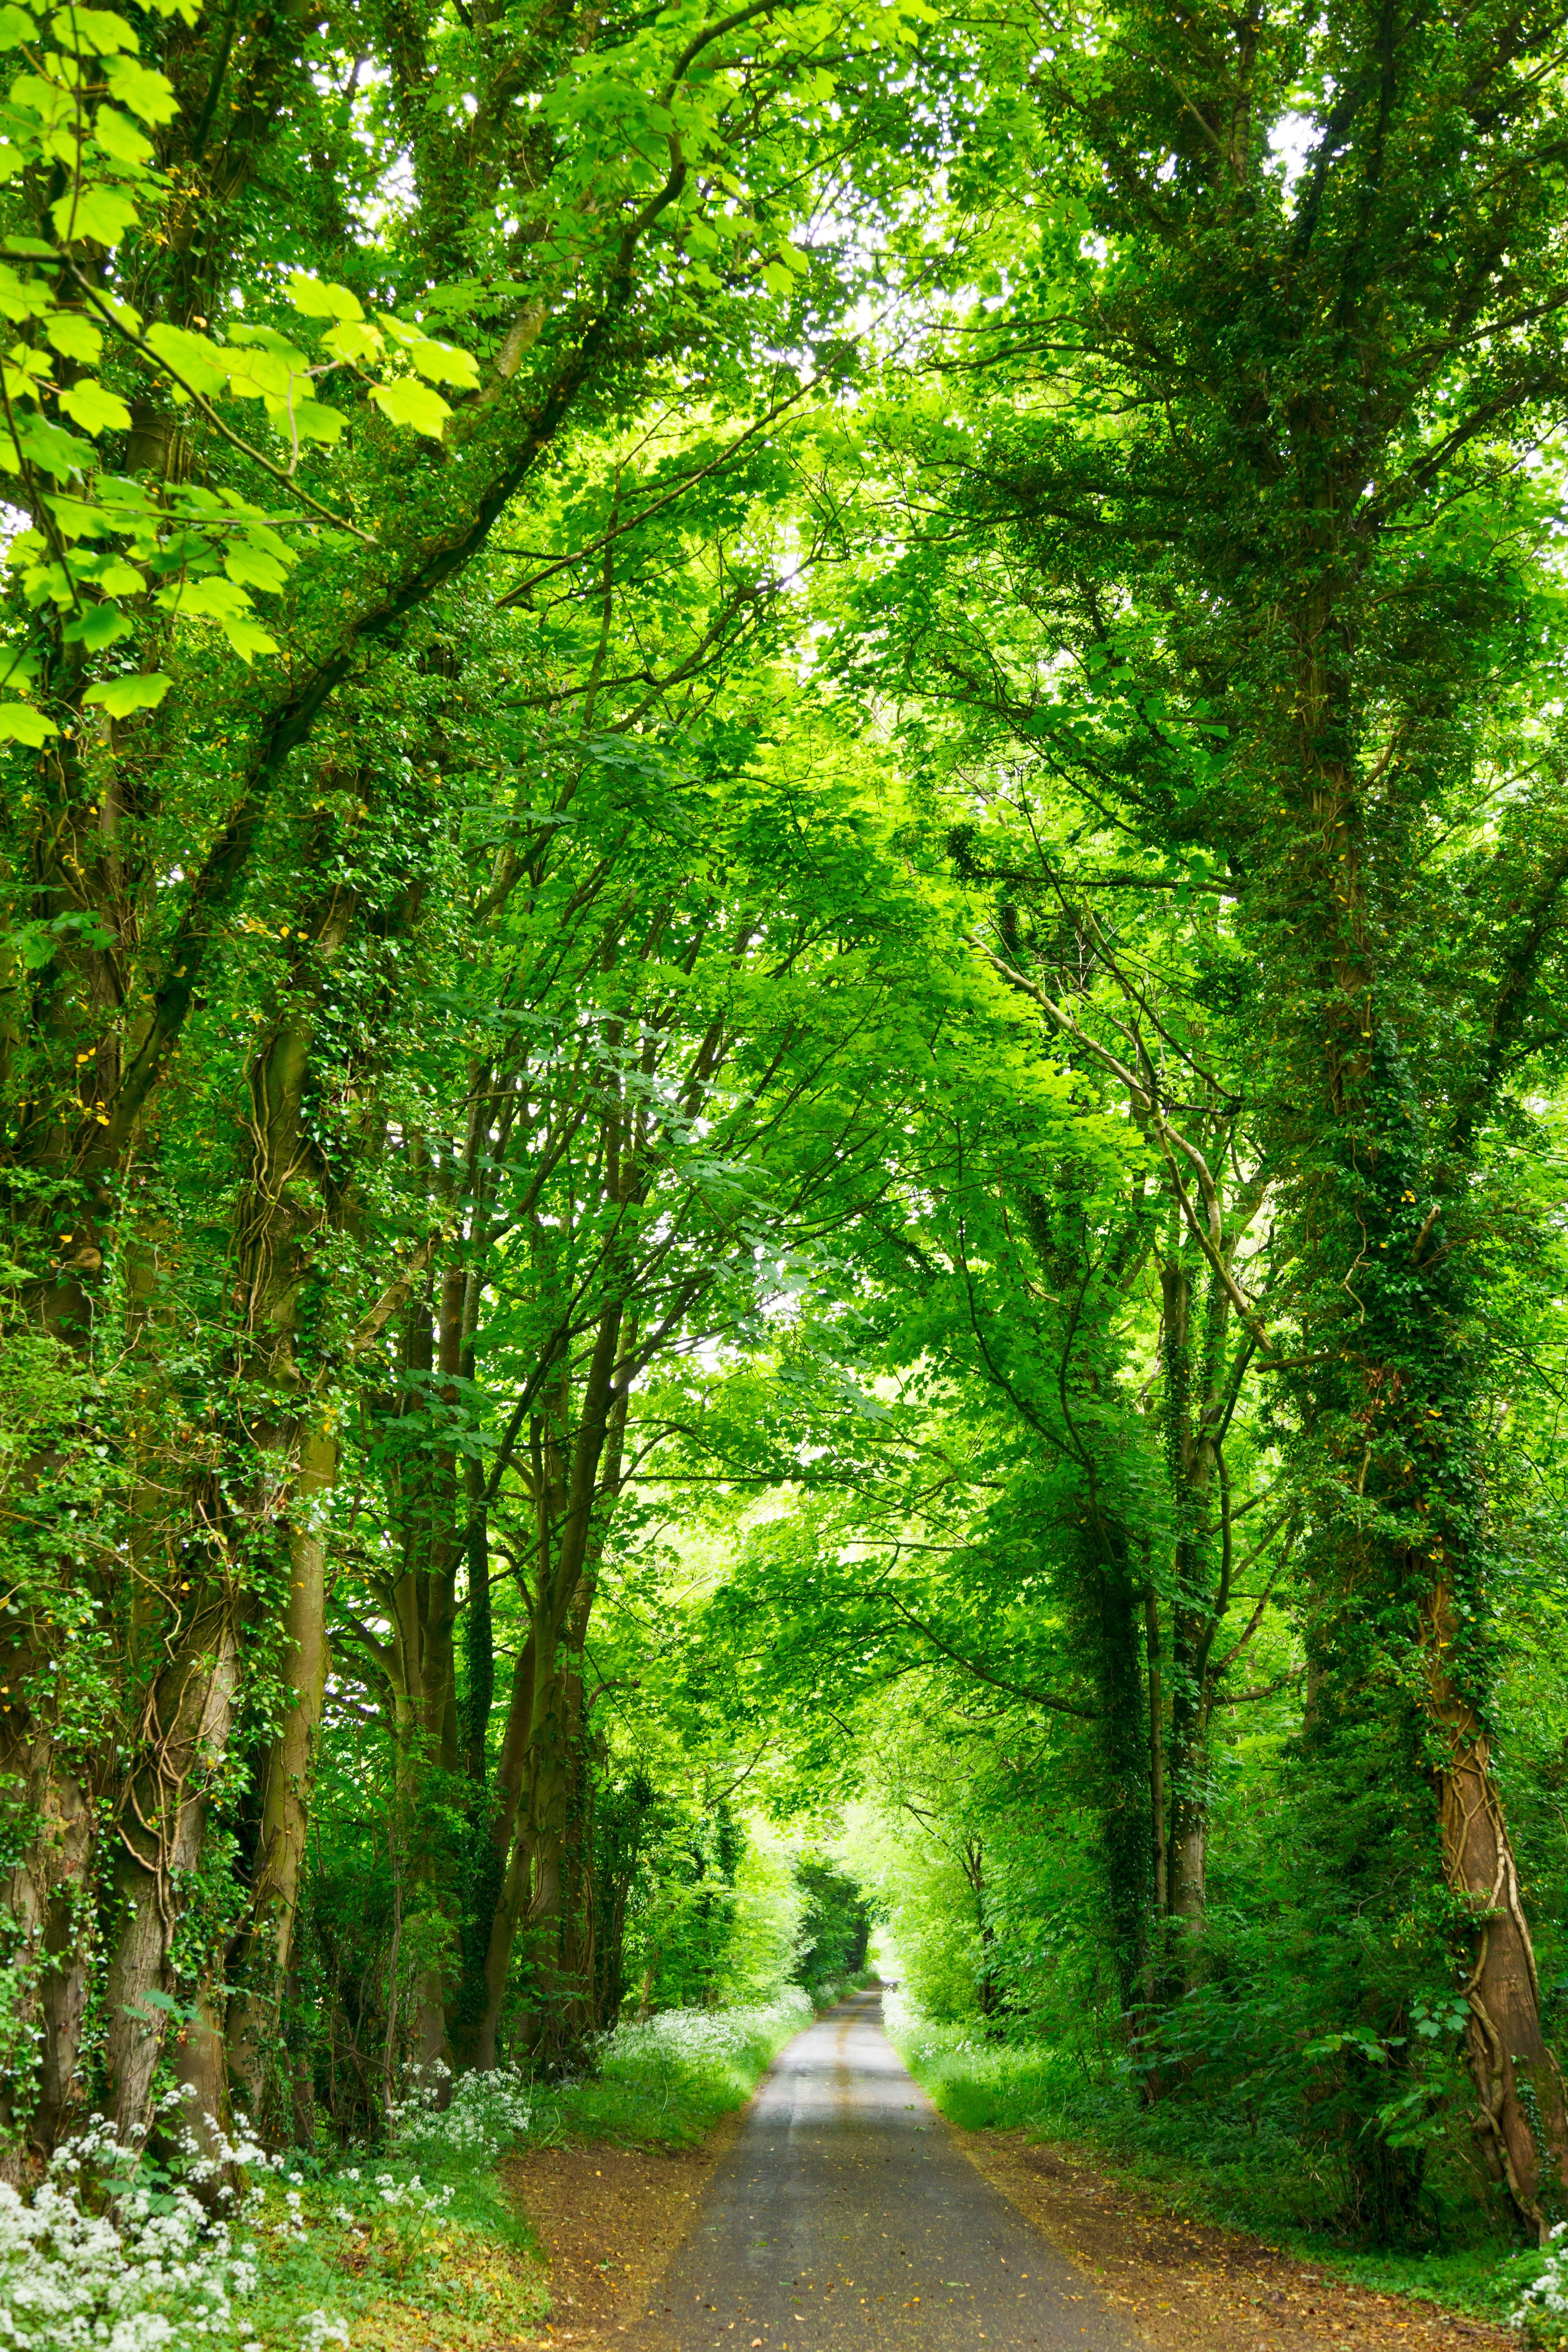 HD Wallpaper A narrow road lined with fresh green trees - #Tree #Forest # Wallpaper #Photograph Nature, st. Nature picture, Beautiful landscapes, Nature image